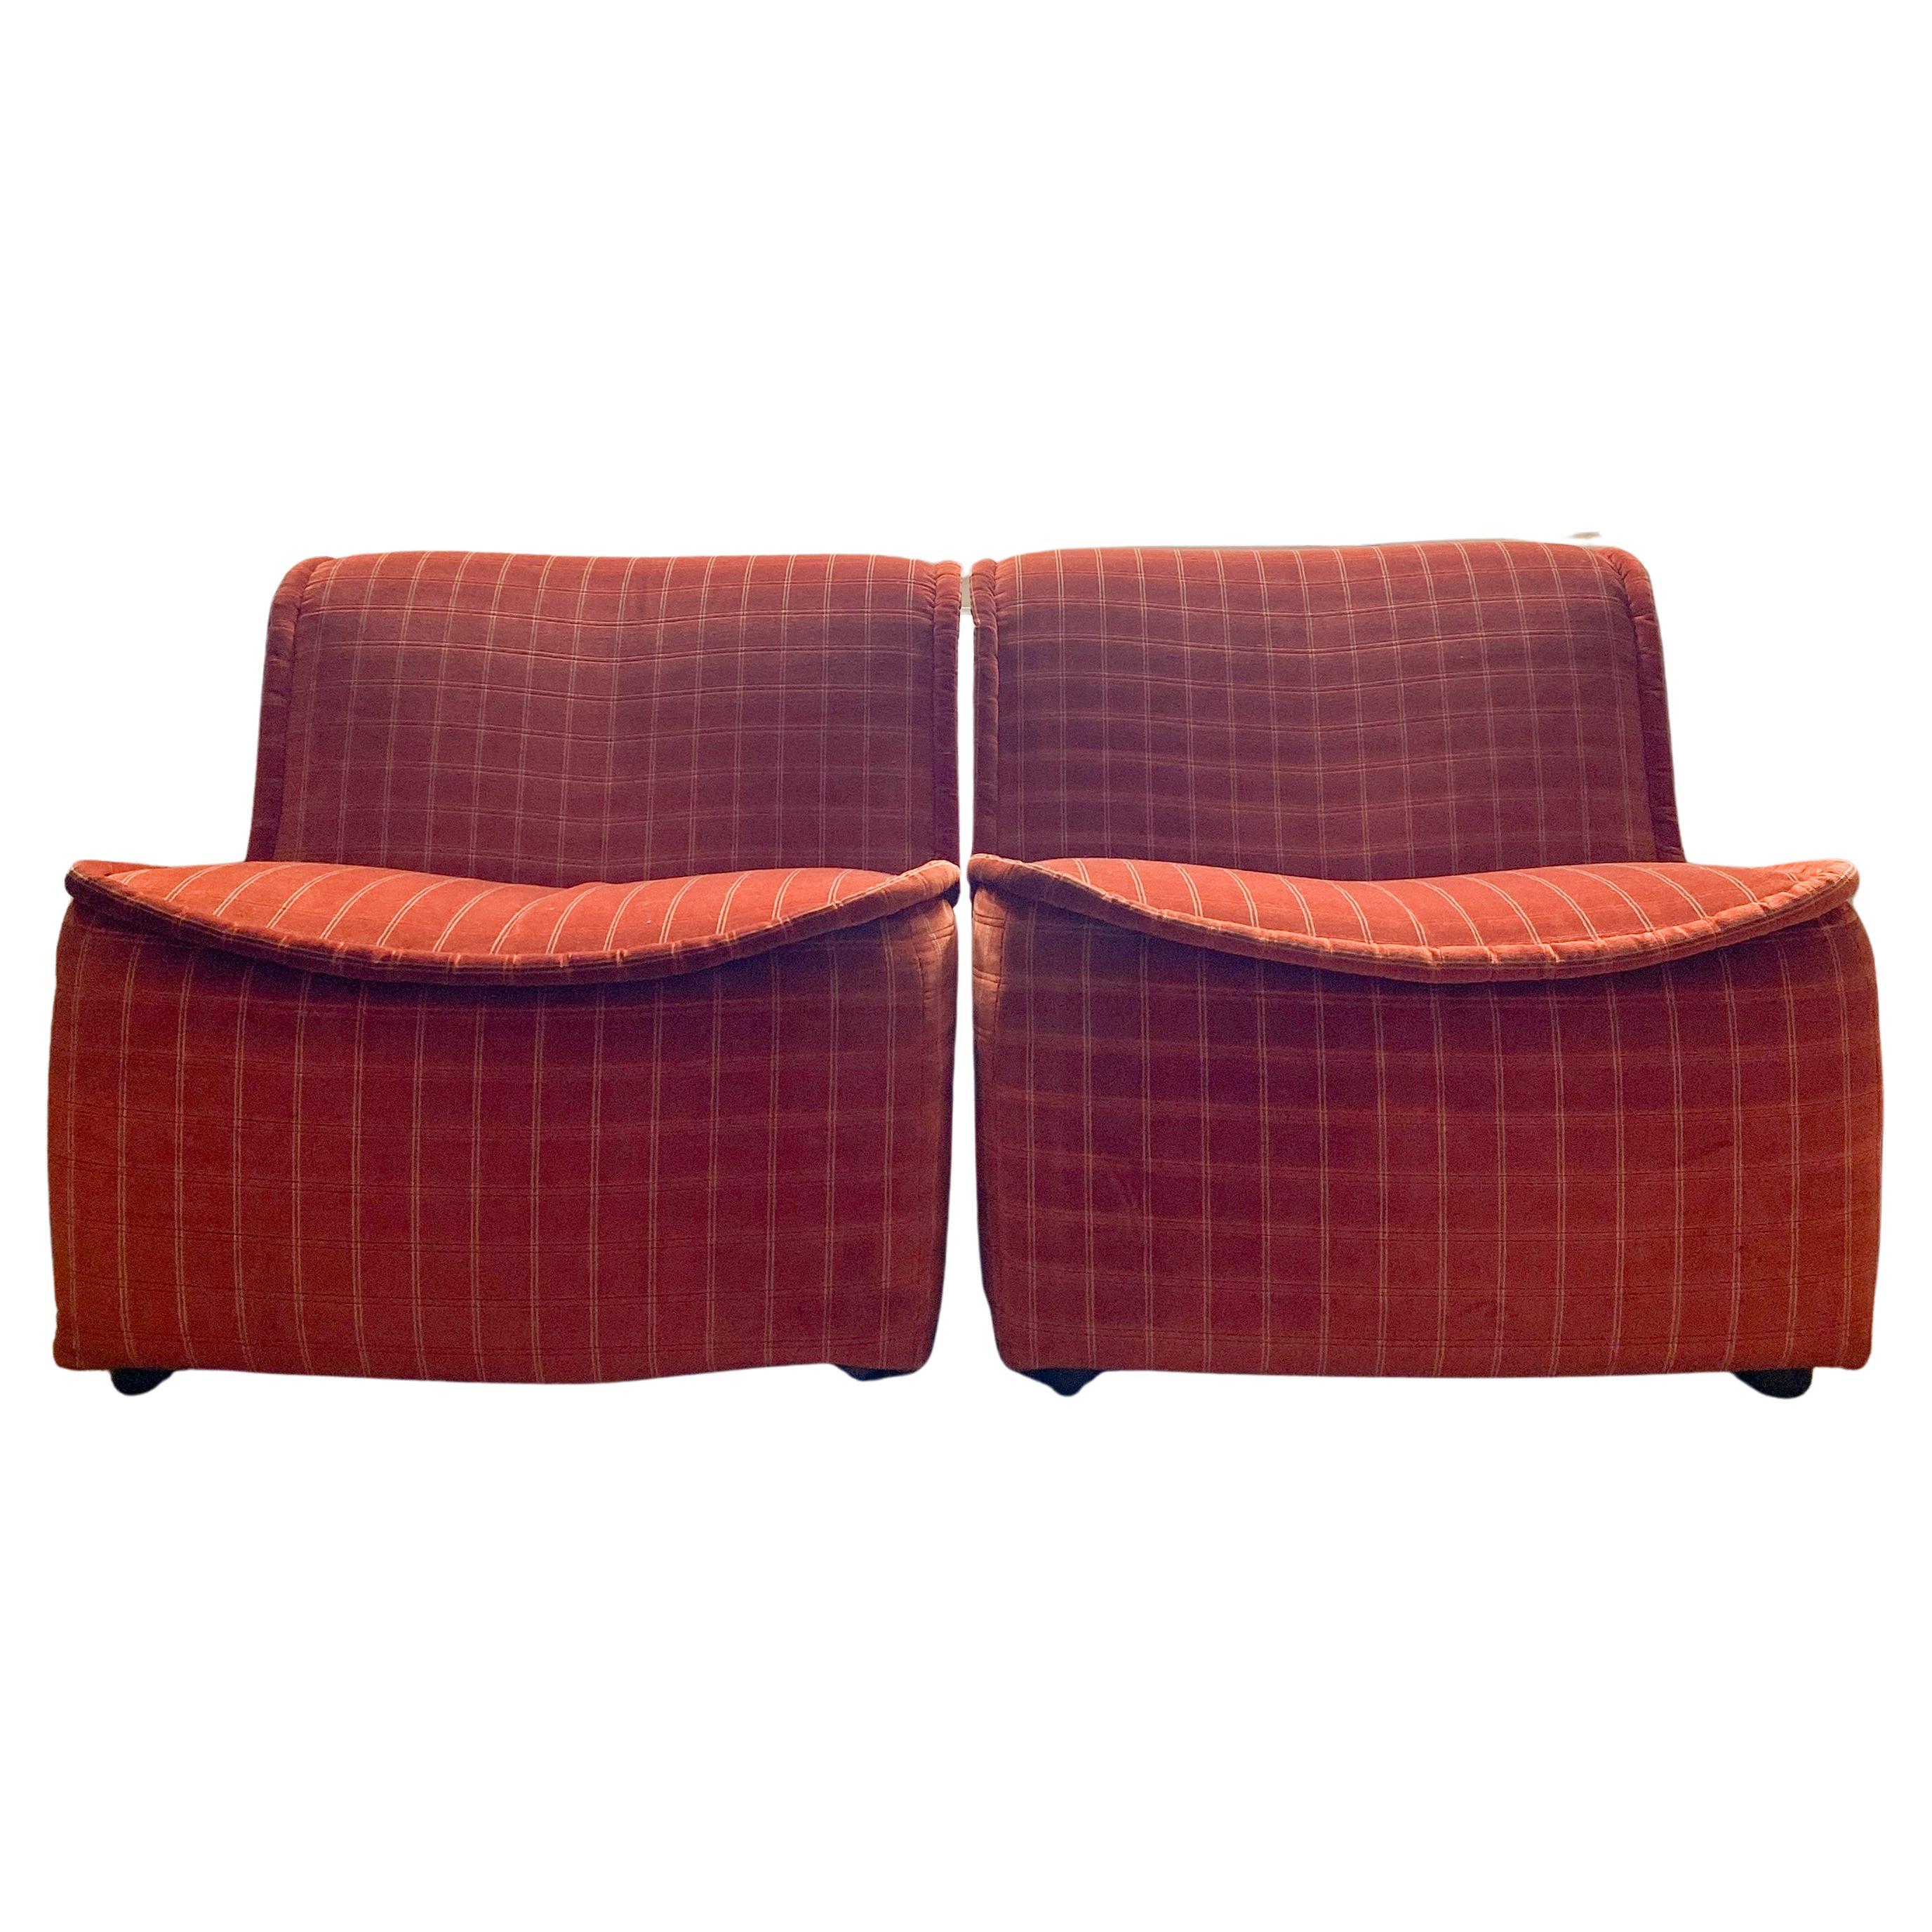 Pair of "Calida" Lounge Chair designed by Arch. Giudici